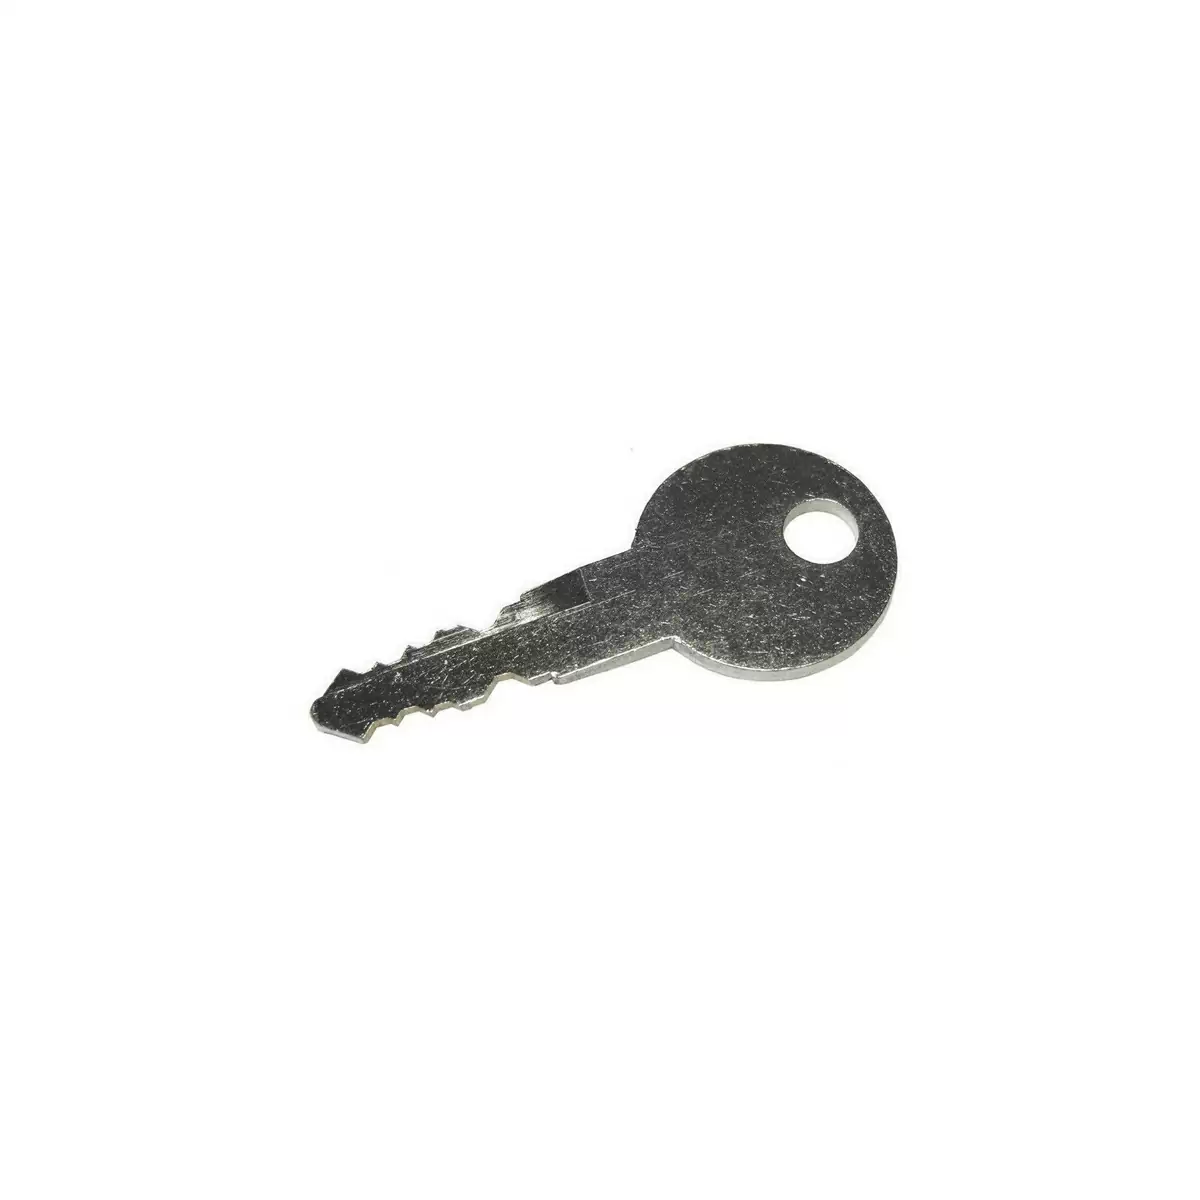 N.16 Spare Keys For Rear Carrier Azura Xtra VC-X25 - image